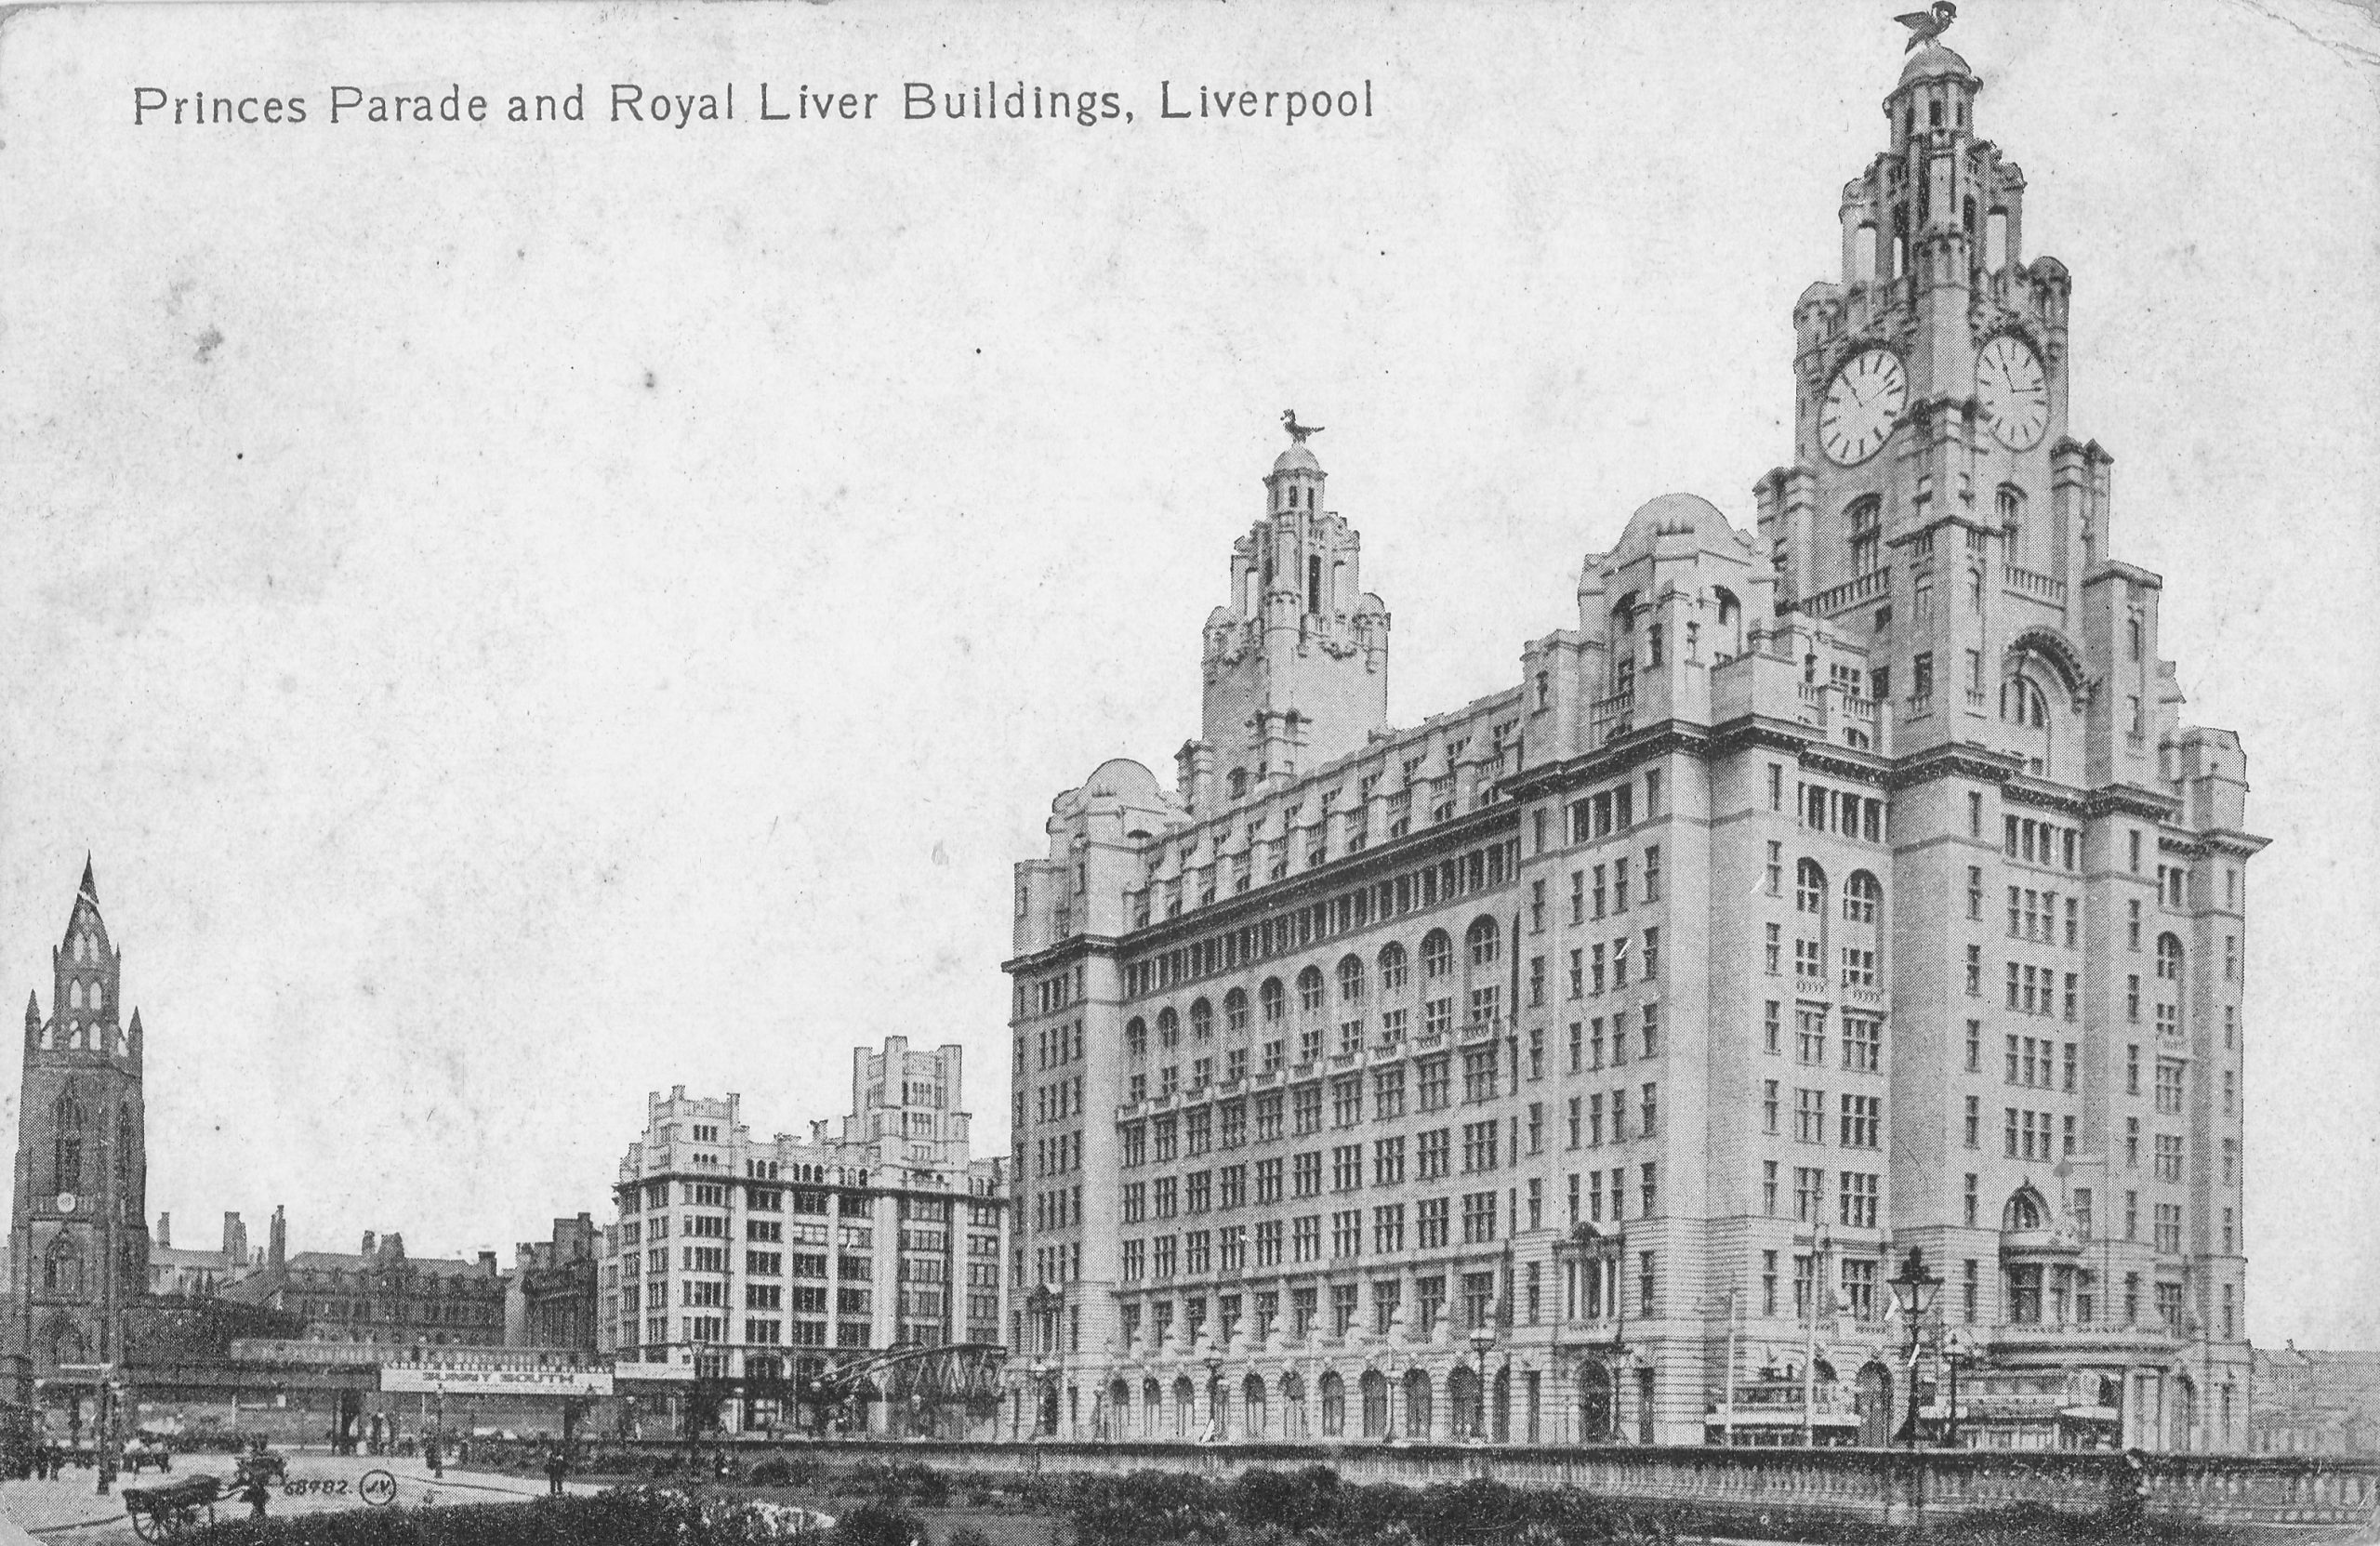 Photograph of the north west side of the Liver Building, Liverpool